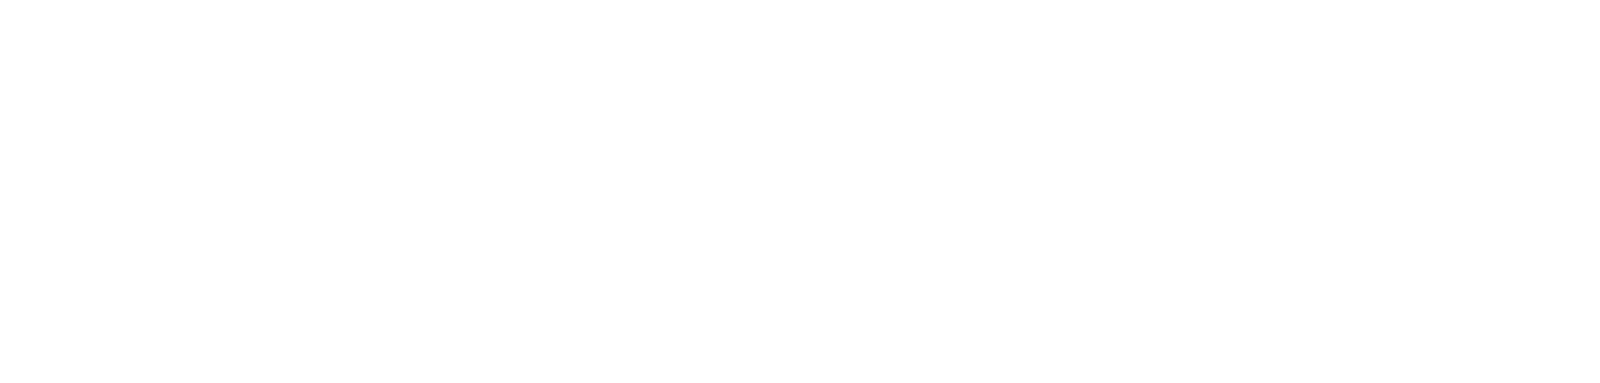 interation-institute-for-social-change